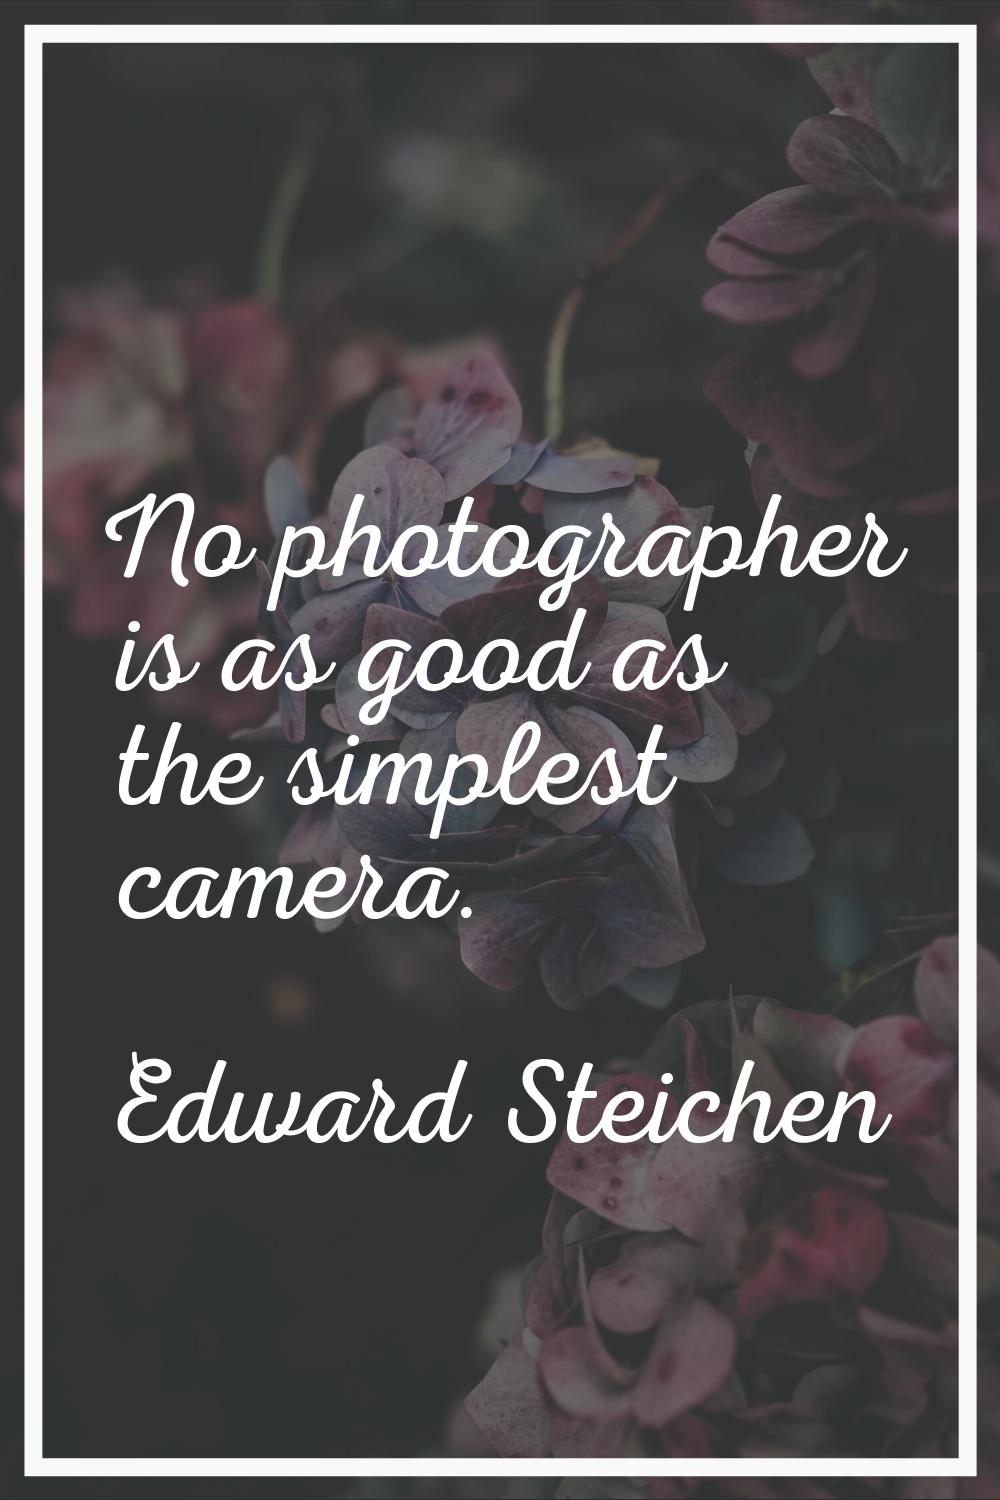 No photographer is as good as the simplest camera.